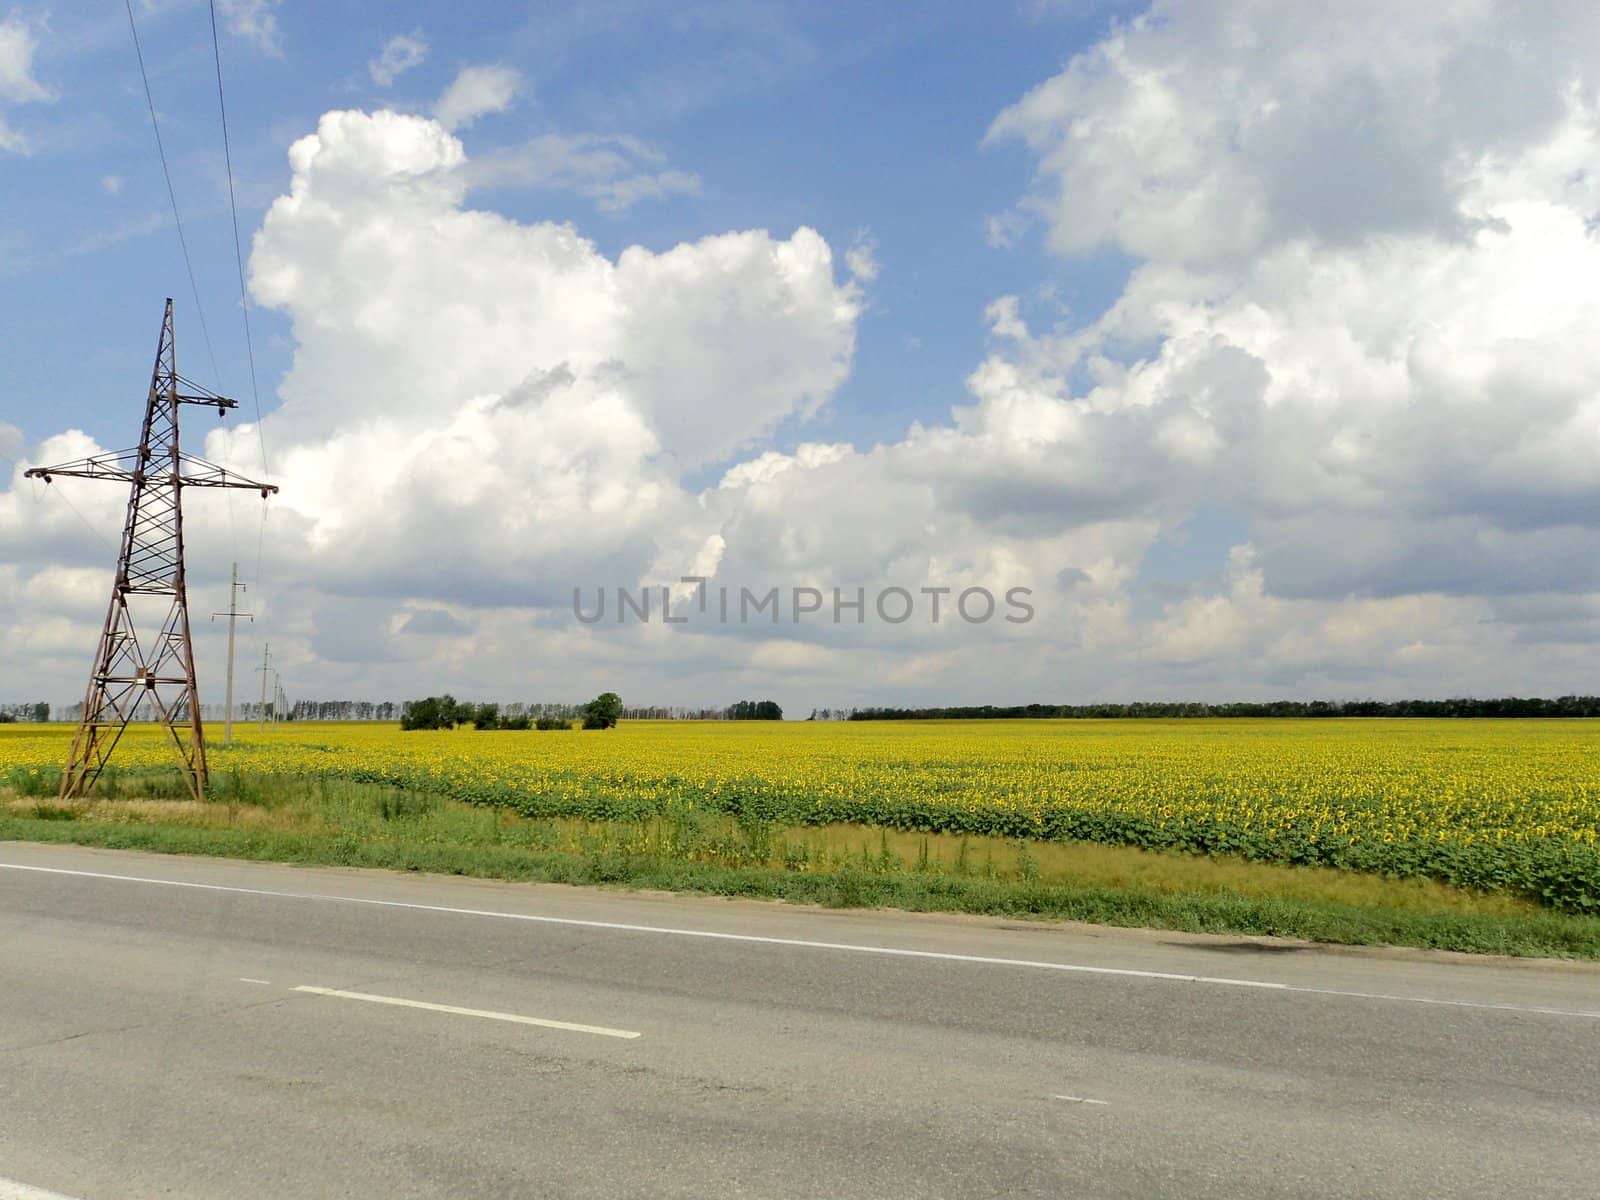 Landscape with sunflowers by Julialine